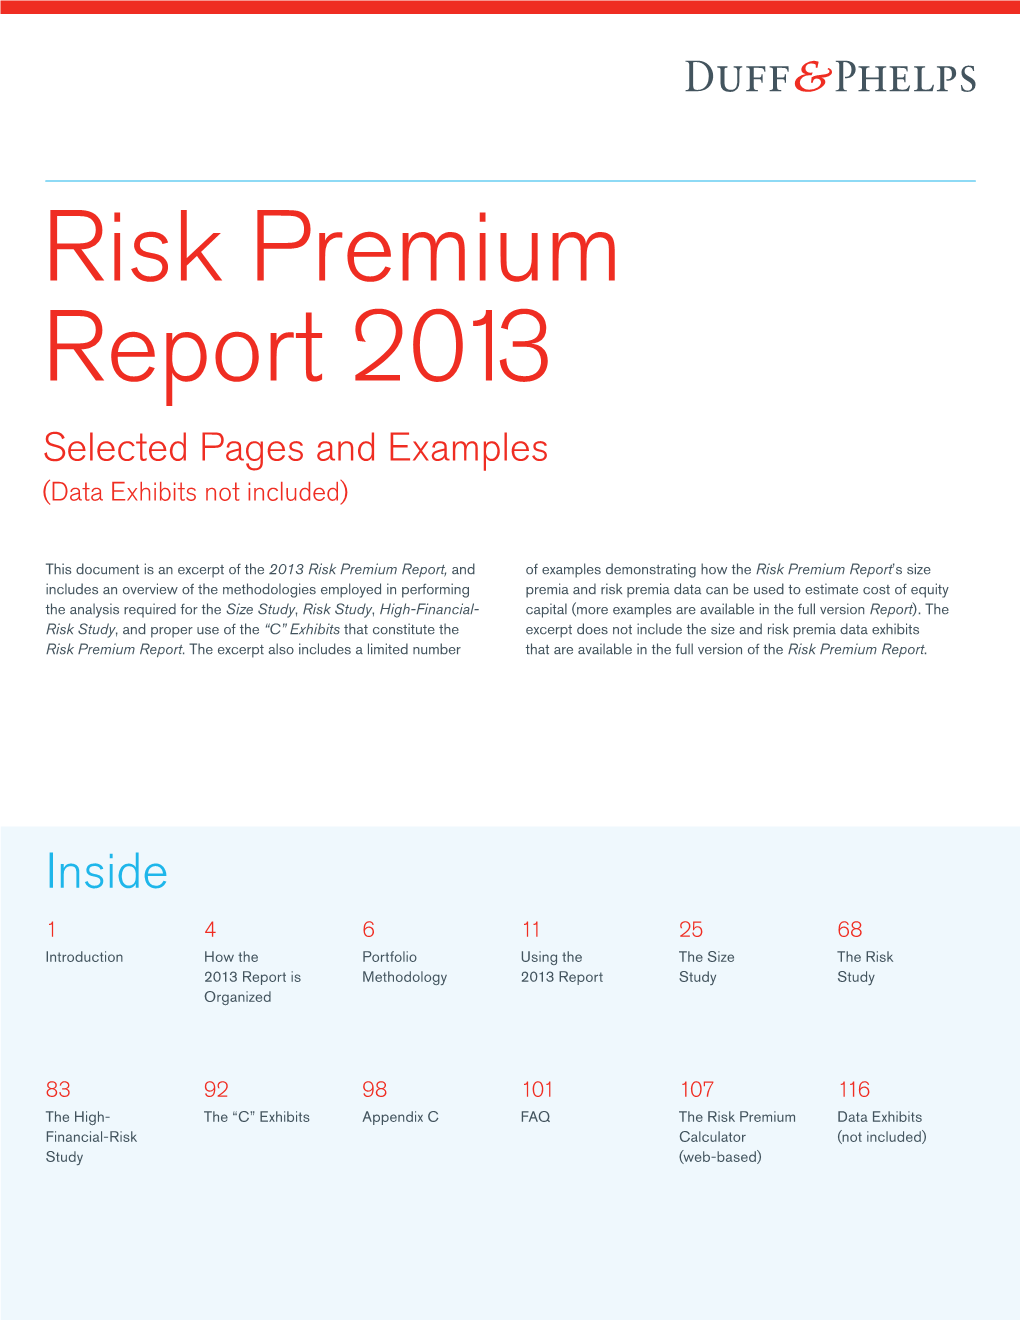 Risk Premium Report 2013 Selected Pages and Examples (Data Exhibits Not Included)